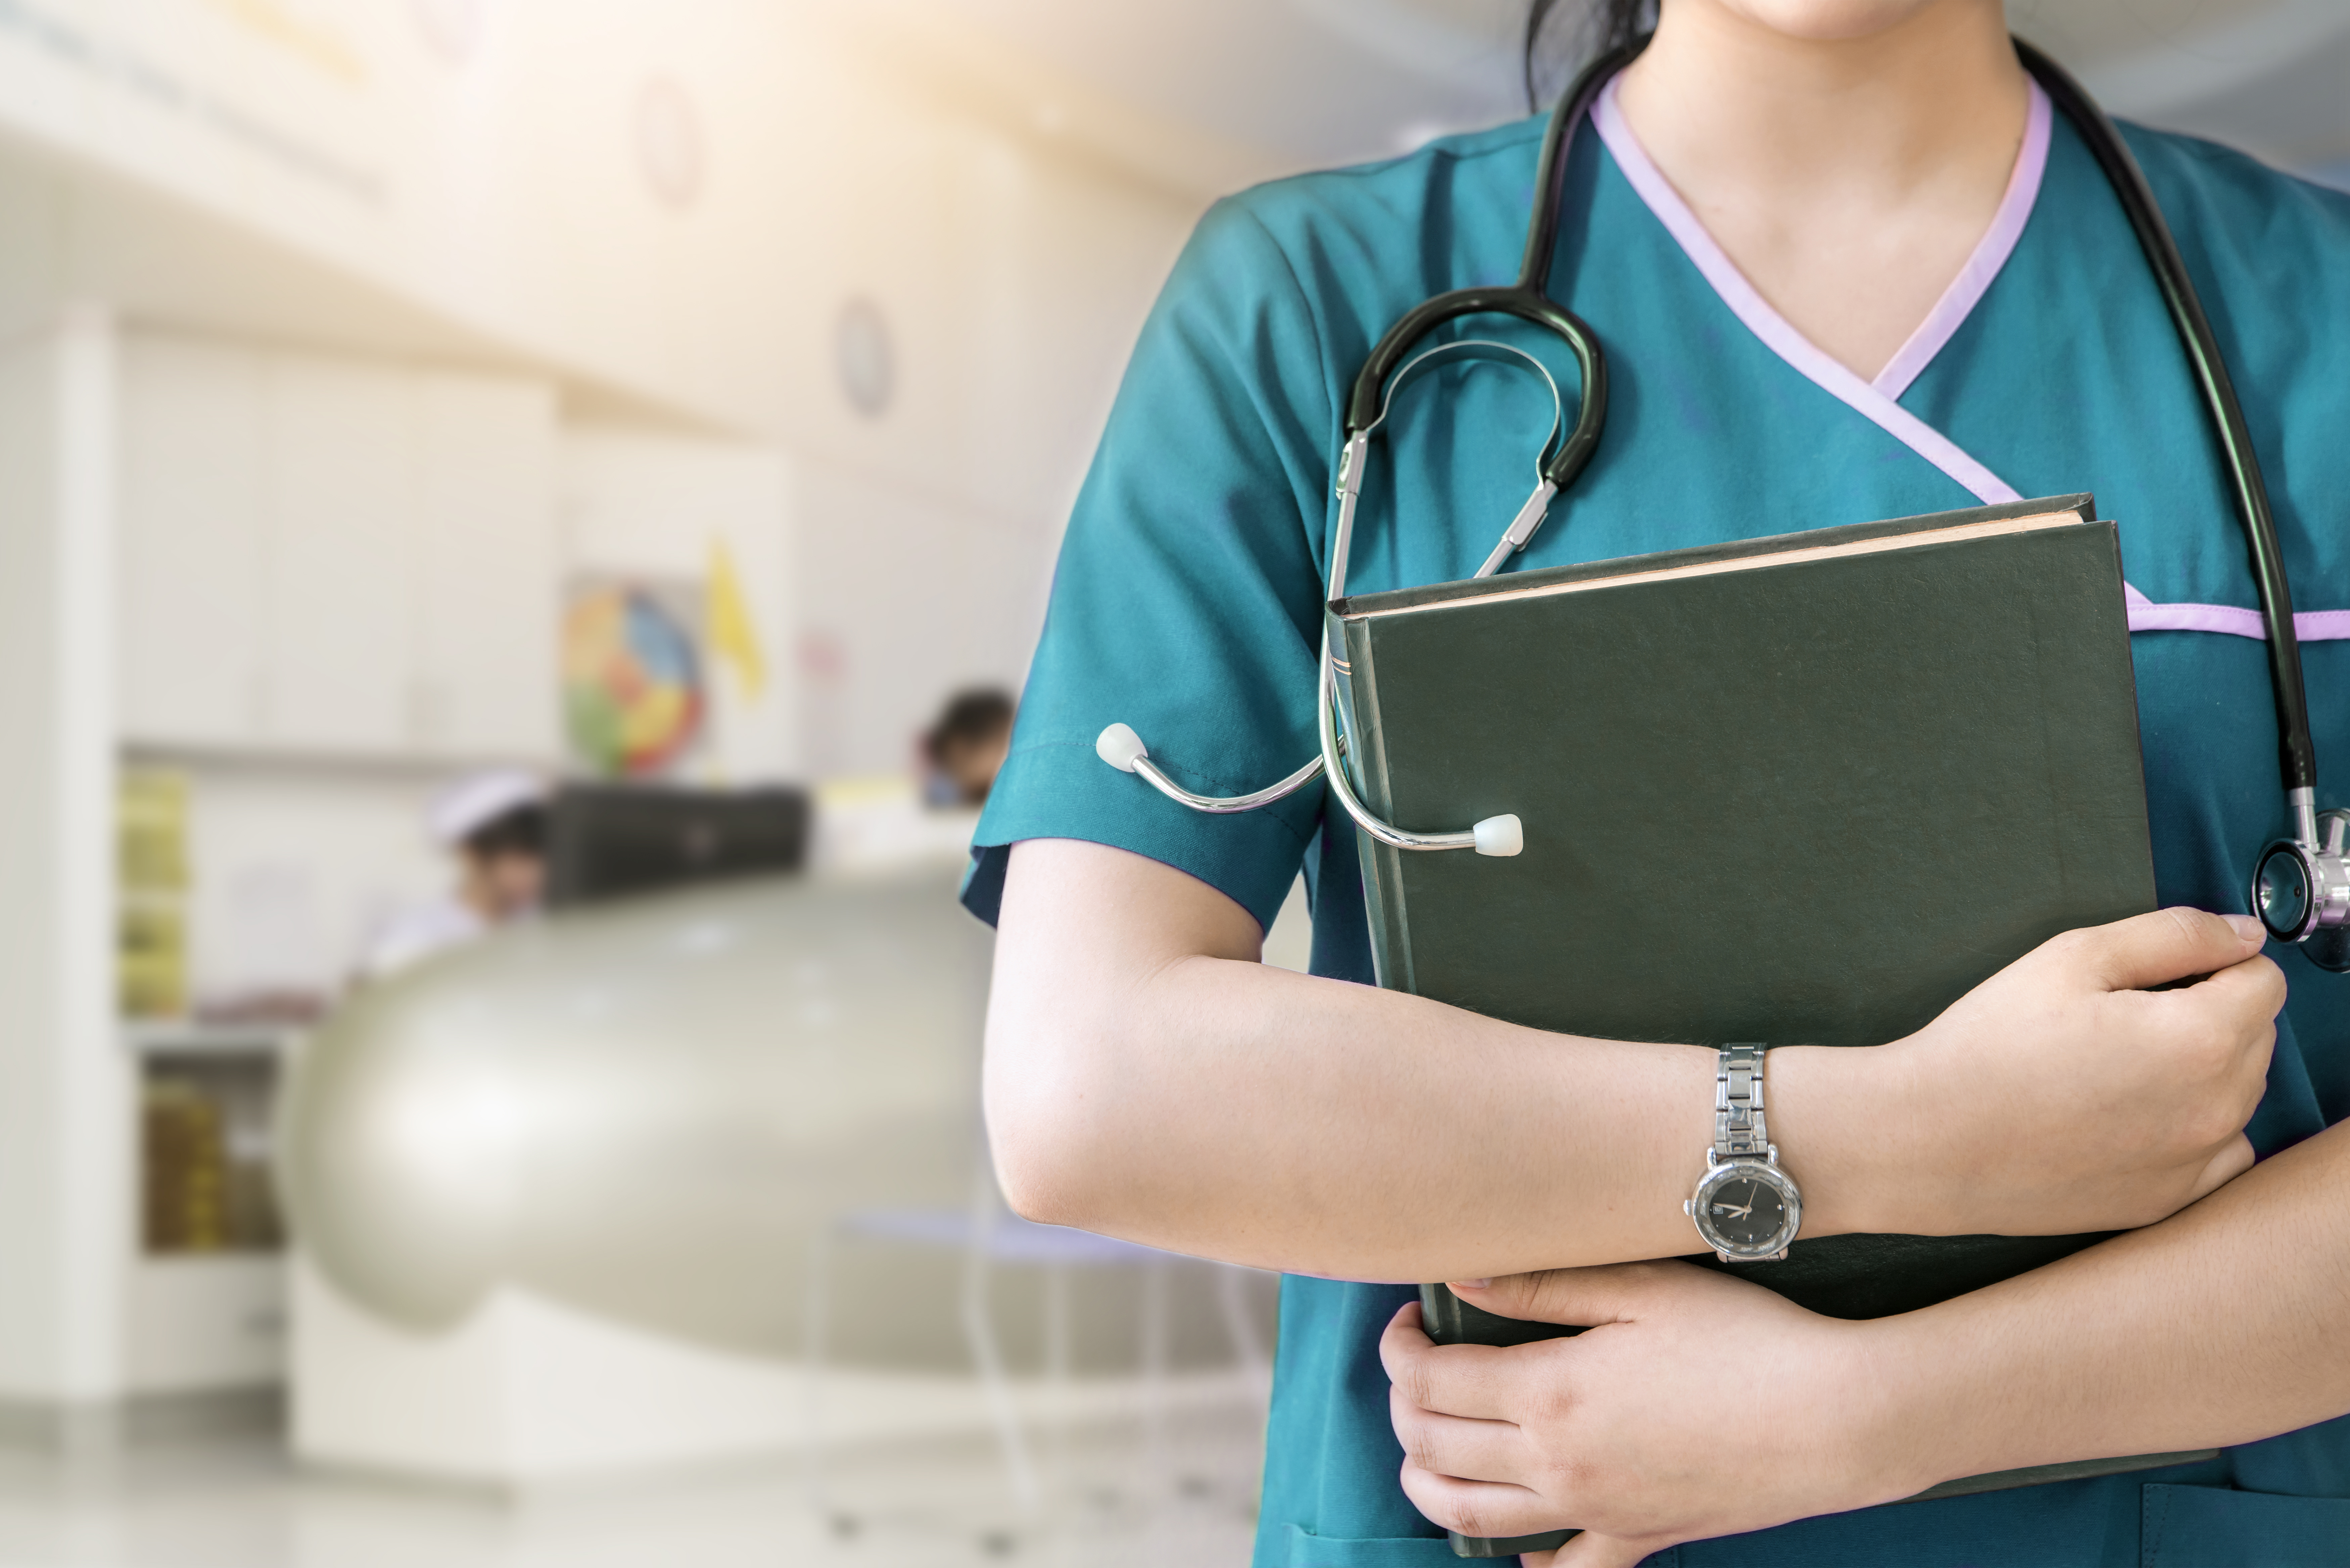 A partial image of a nursing student wearing scrubs and a stethoscope and holding a notebook.